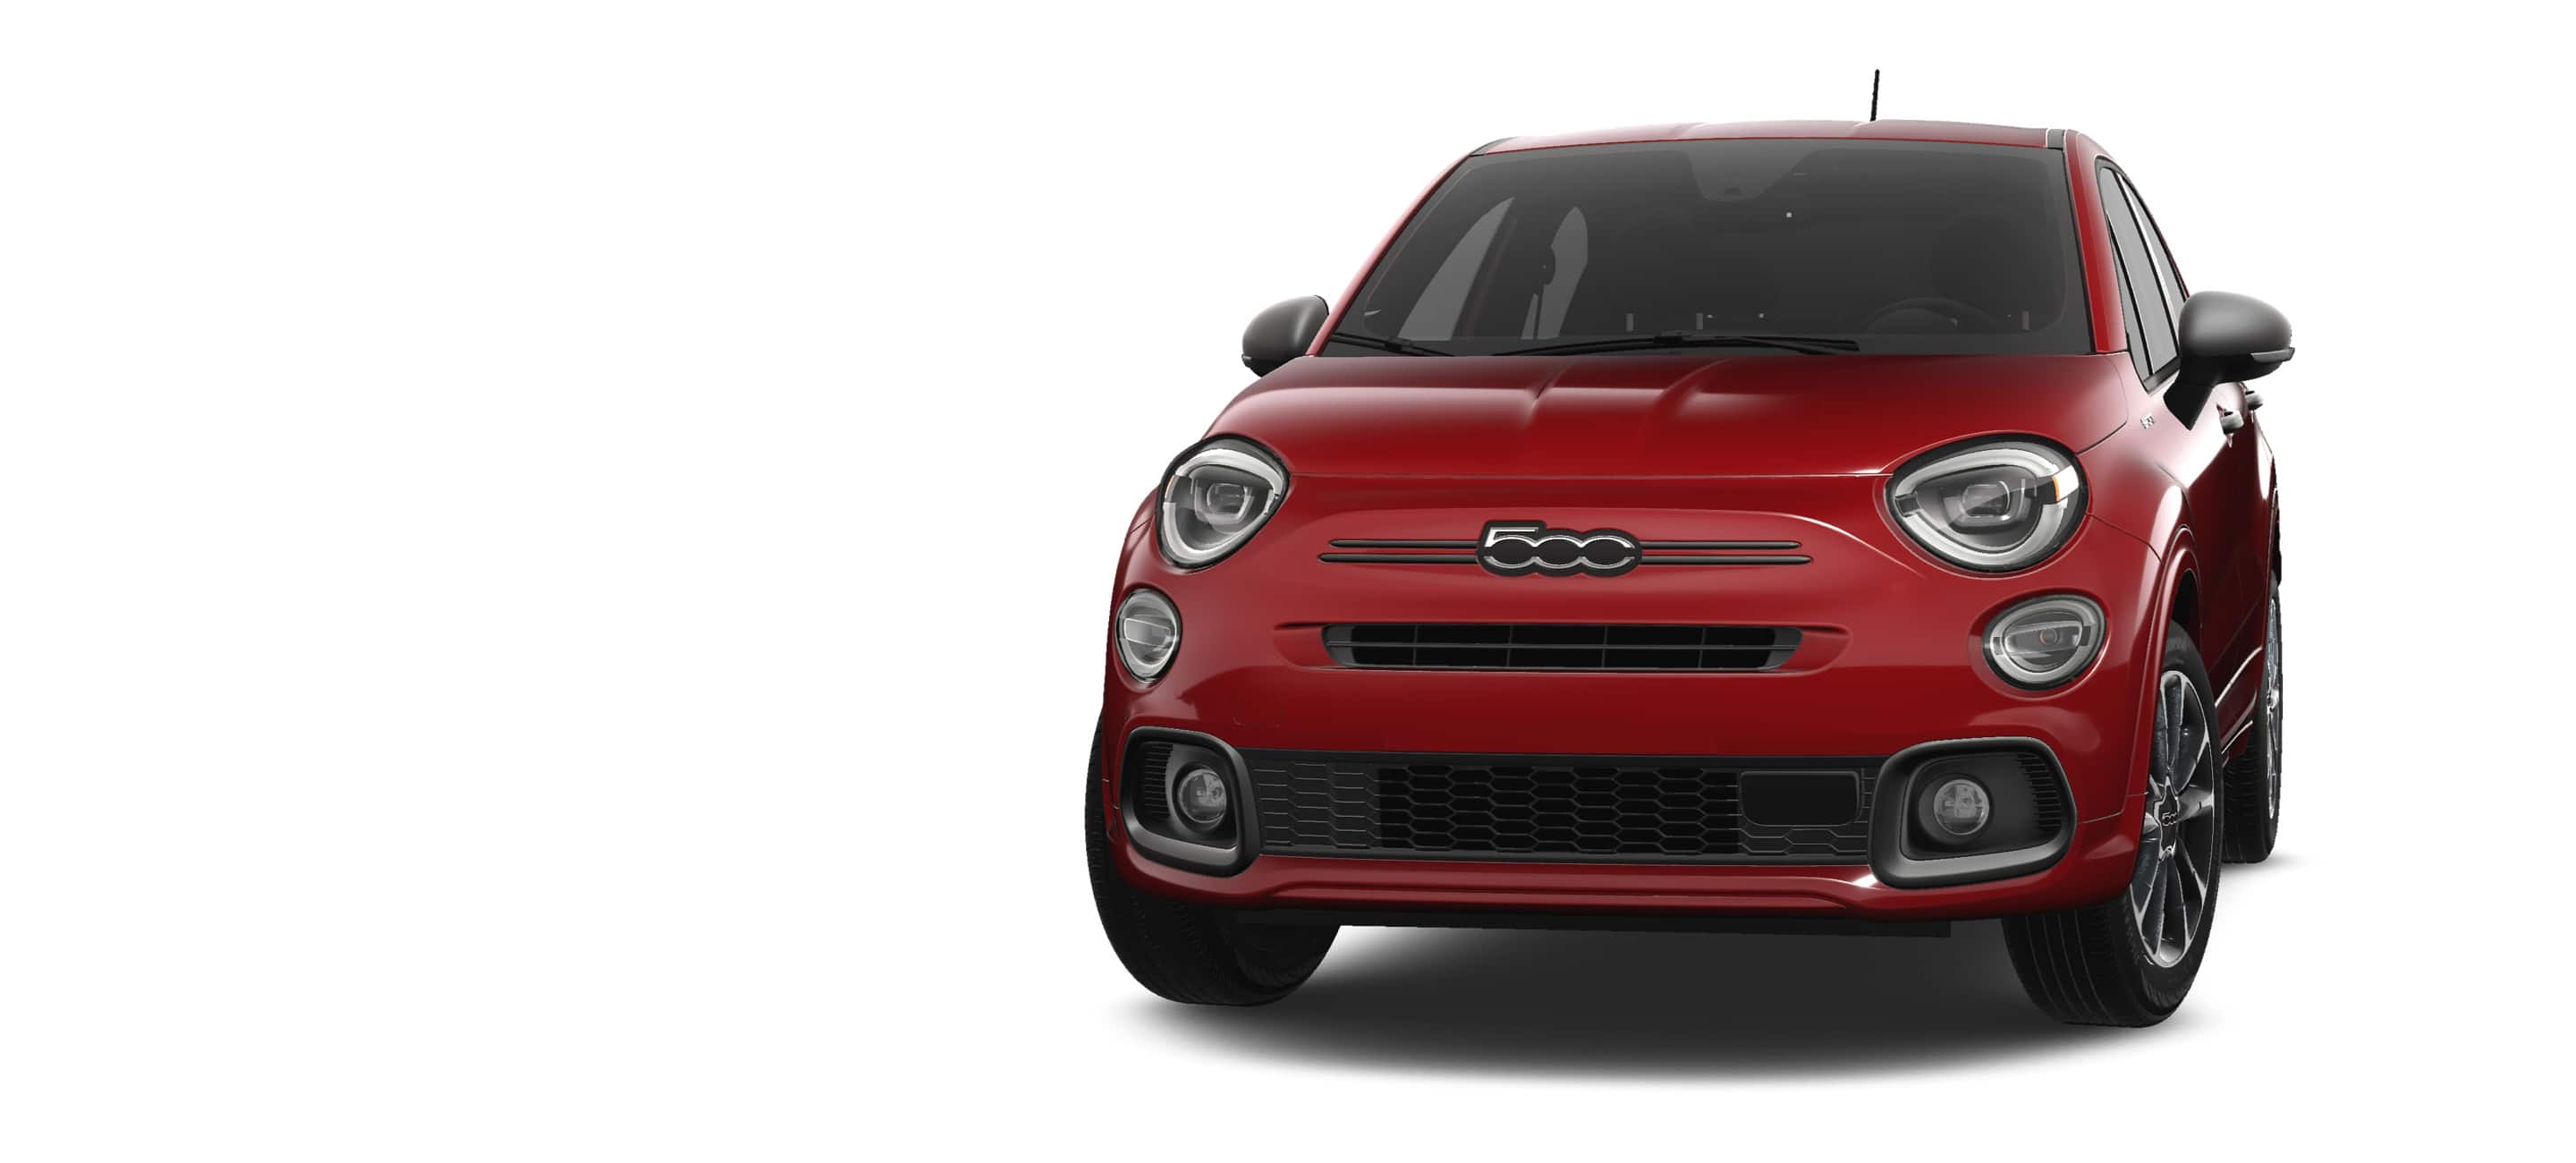 The 2023 Fiat 500X crossover SUV, shown from front.